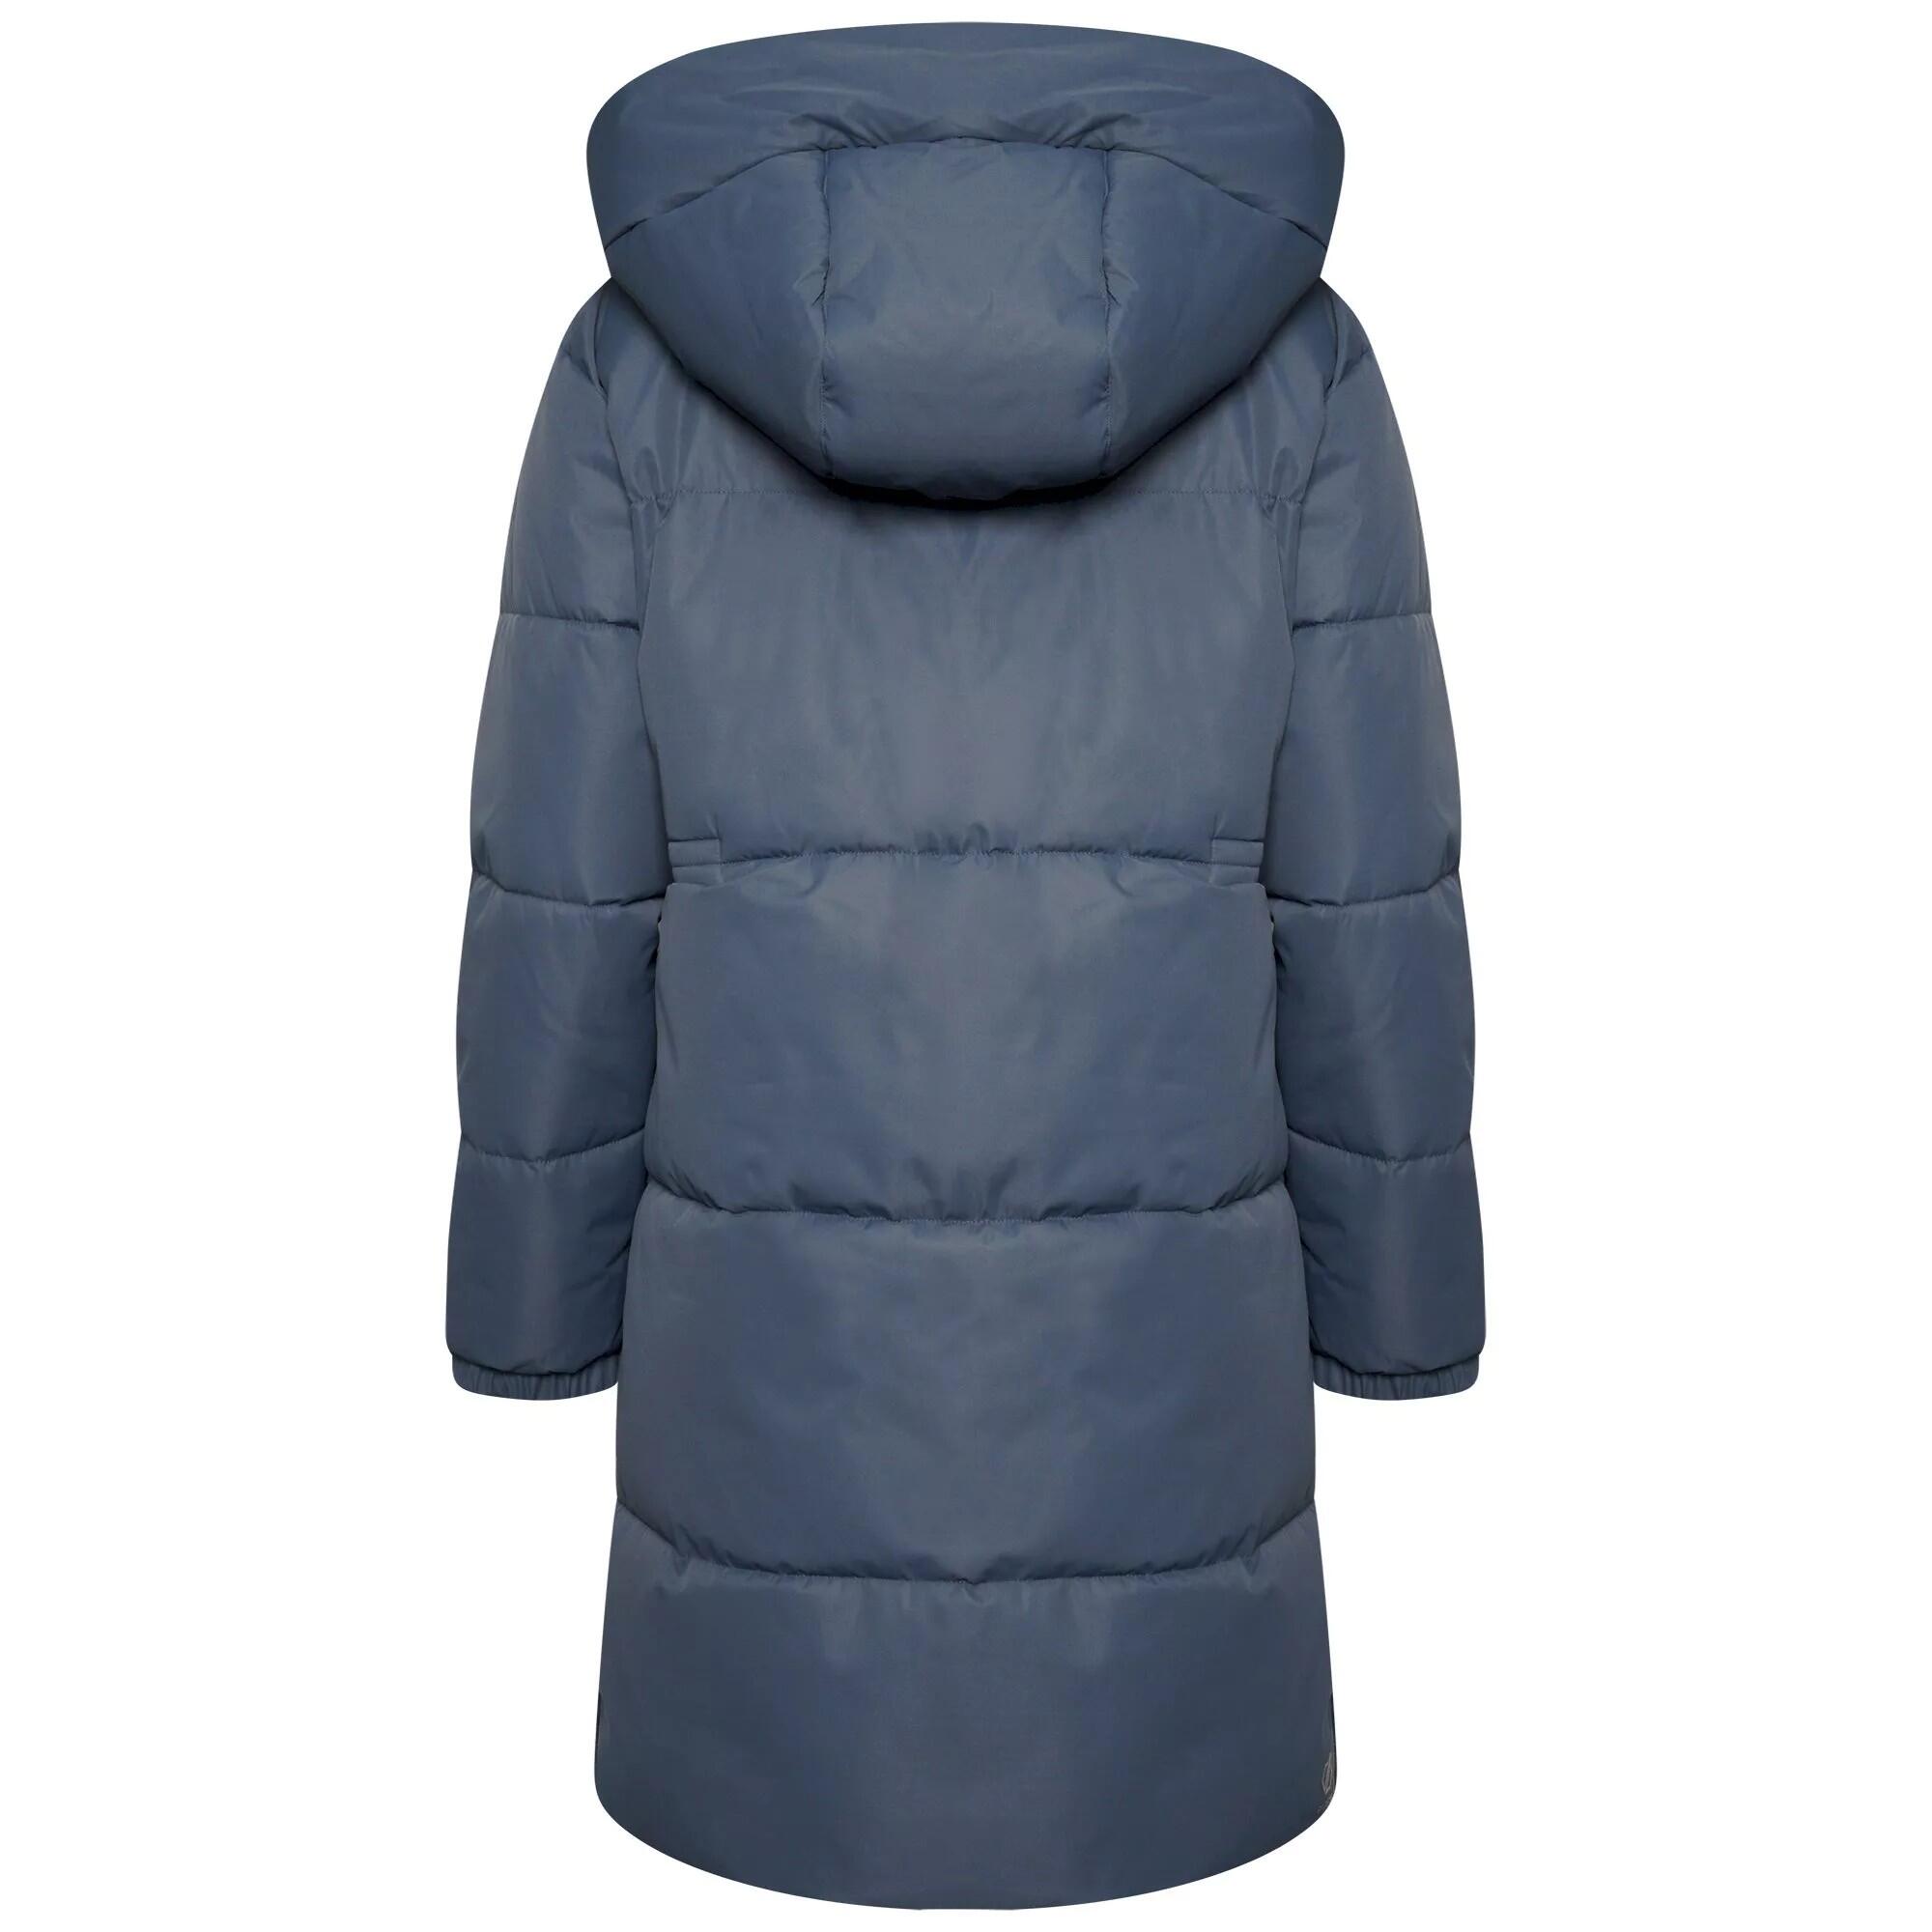 Womens/Ladies Long Length Padded Jacket (Orion Grey) 2/4